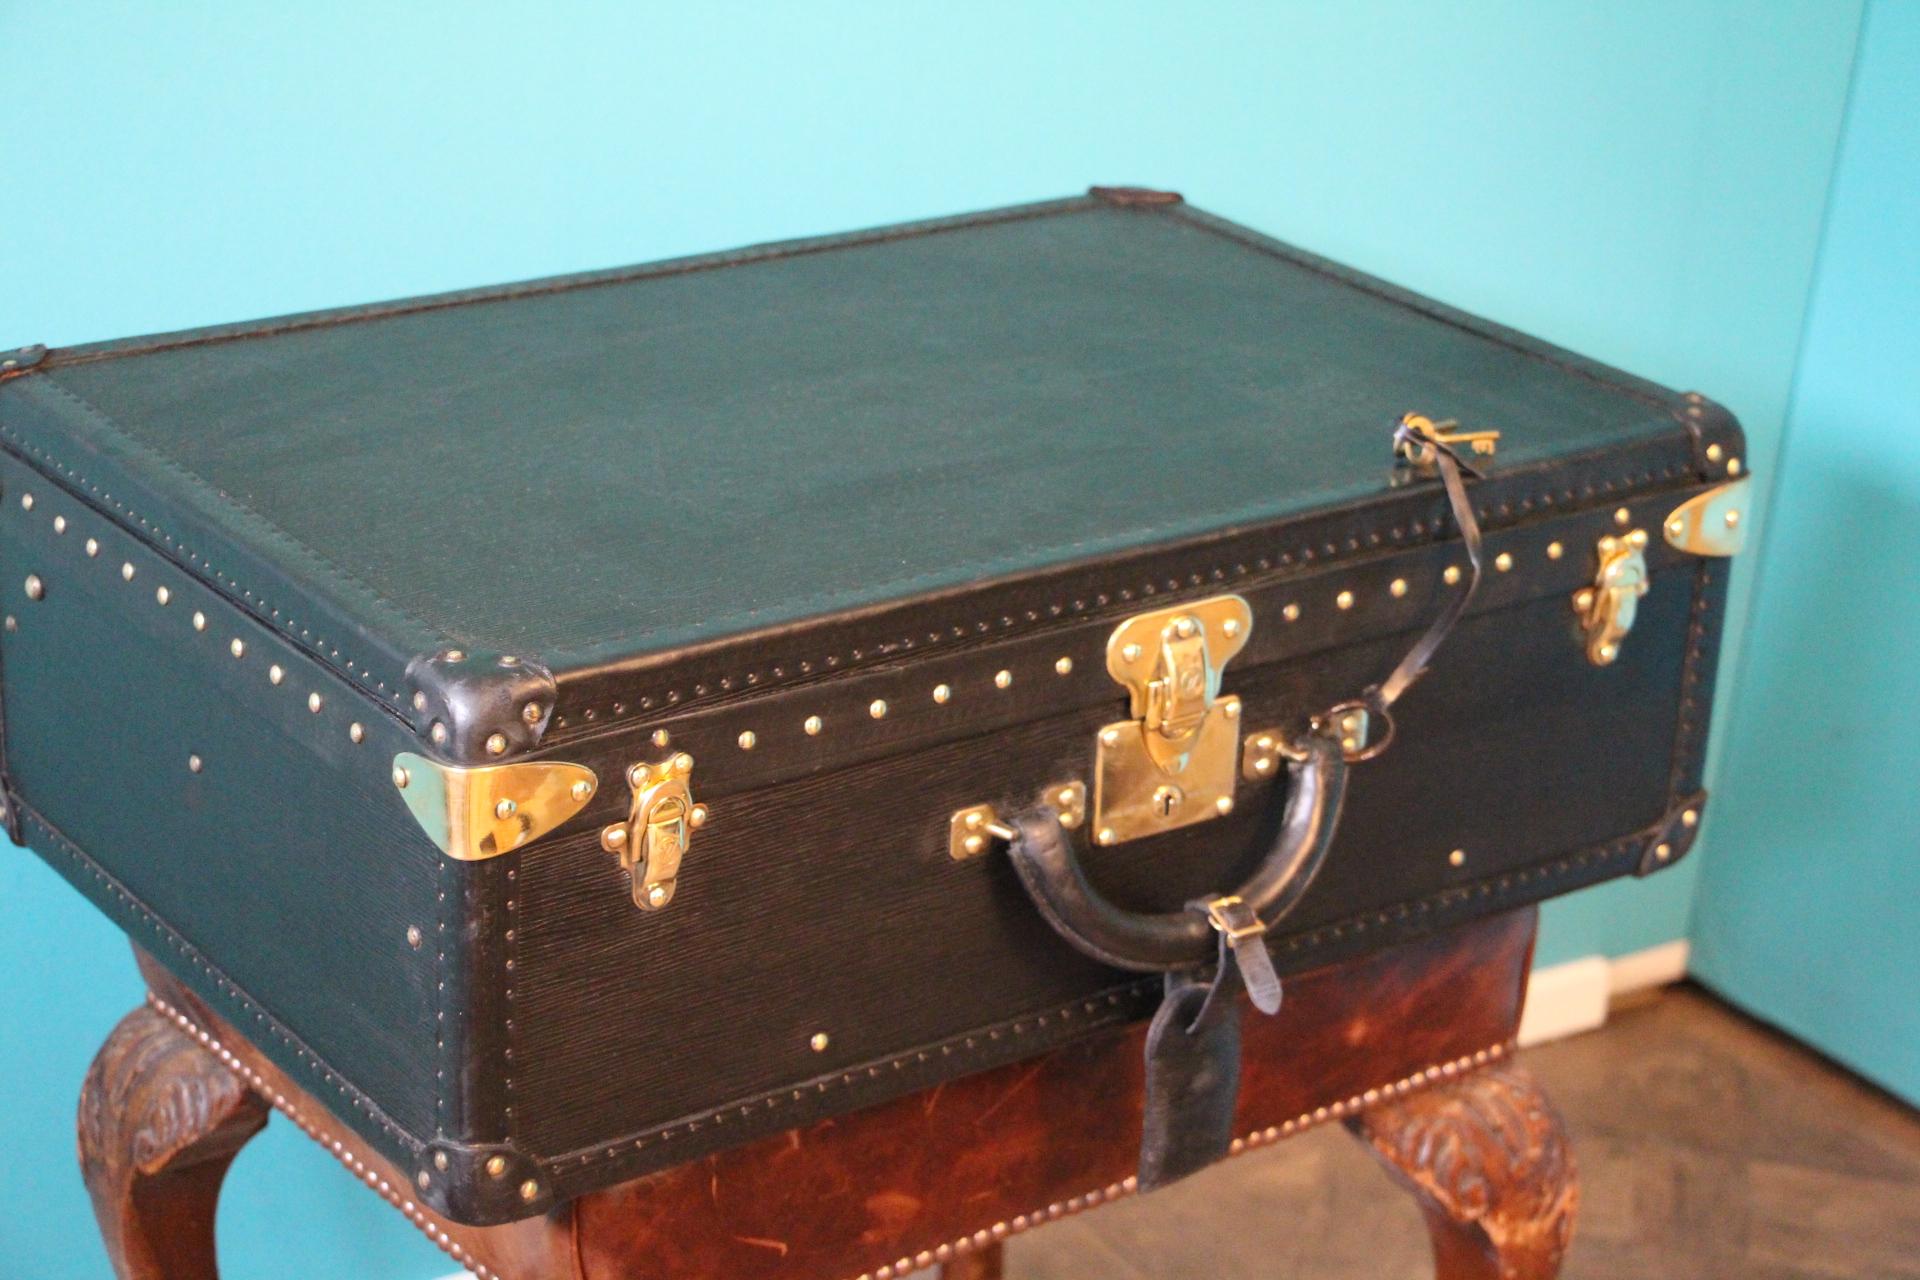 This top of the range all black leather Alzer 65 rigid suitcase features black leather trim, all solid brass LV stamped lock, clasps and studs. Large leather handle.
1 matching black epi leather name holder.
Its interior is in excellent condition,